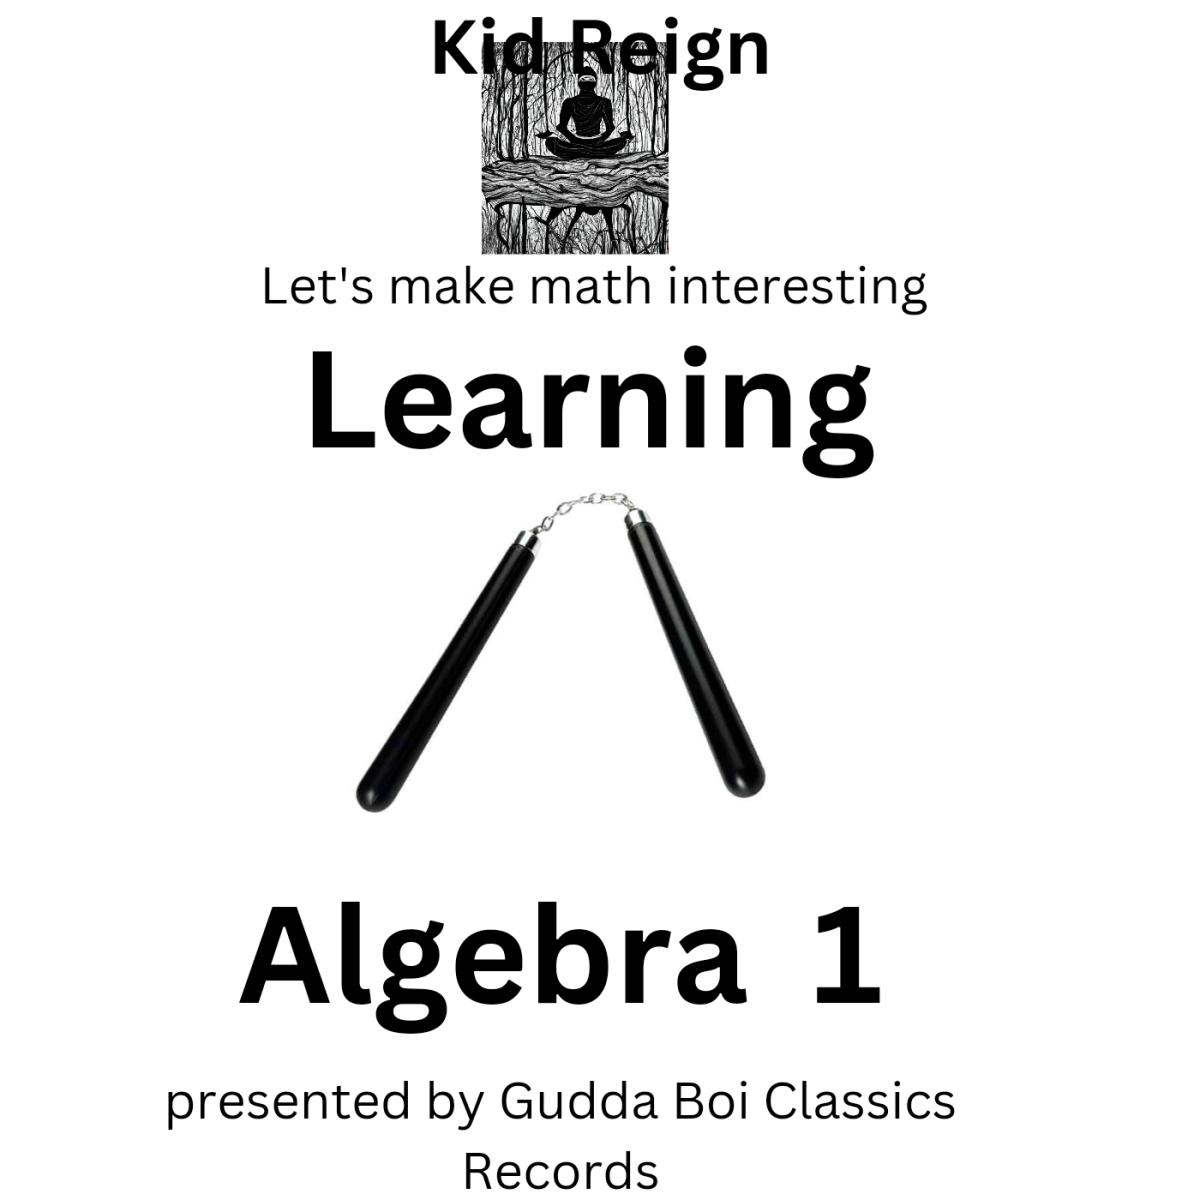 My Service: Let's make Math Interesting - by Kid Reign - presented by Gudda Boi Classics Records